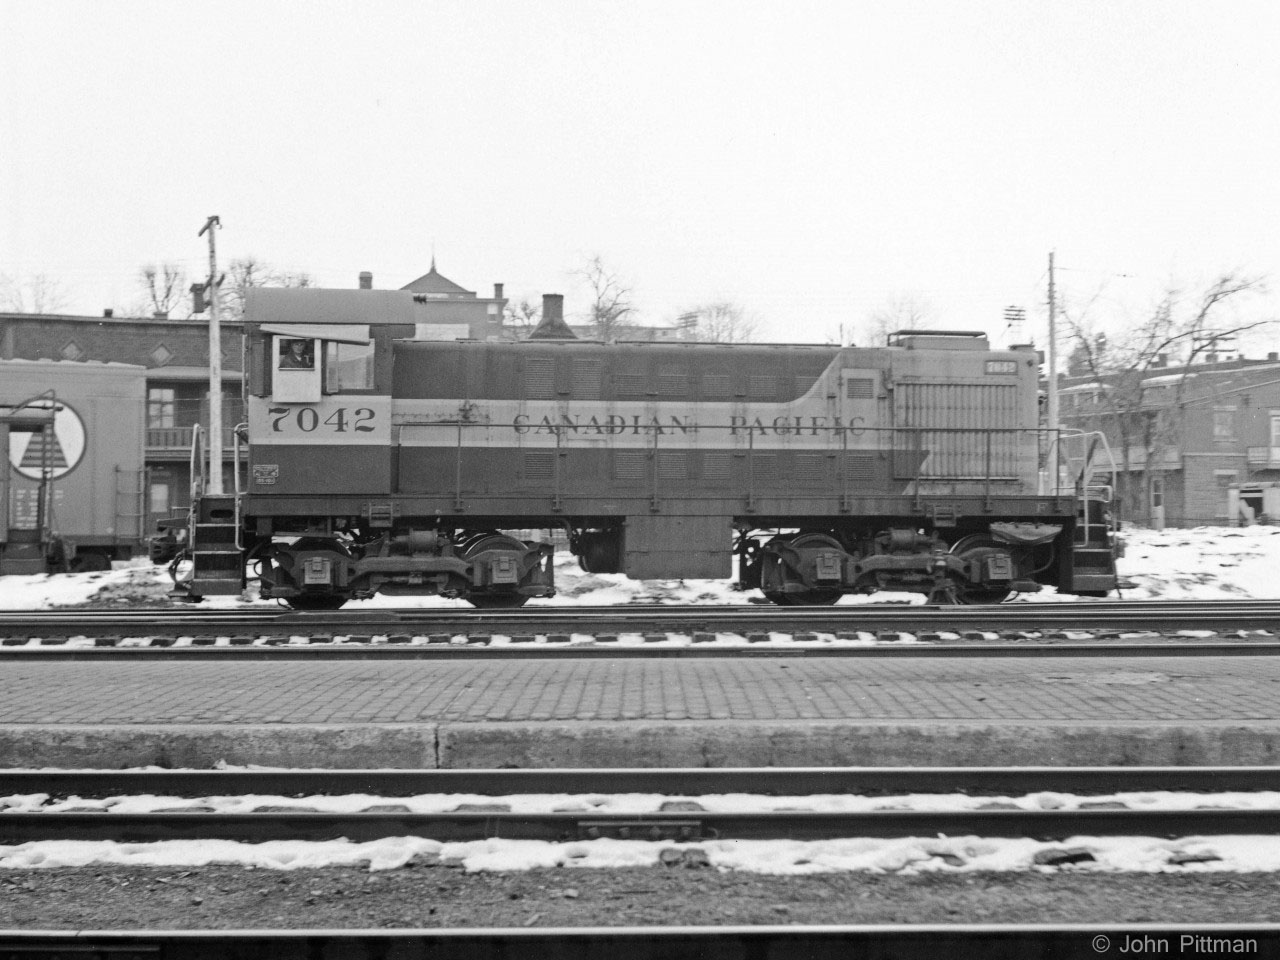 Winter of 1970-71.  Venerable ALCO S-2 switcher CP 7042, is working Trois-Rivieres yard, where it was regularly assigned. My source indicates it was built by ALCO Schenectady in 1946, so it was then about 24 years old. The ALCO cast metal manufacturers plate is on the bottom right of the cab, above the cast CP class DS-10d plate. 
I was the only visible railfan in T-R the two years we lived there.  The engineer seems be looking in my direction, hope I didn't annoy him.   
Camera was a Yashica Mat twin lens reflex. Best suited for slow or stationary subjects, as the ground glass viewfinder reversed everything.